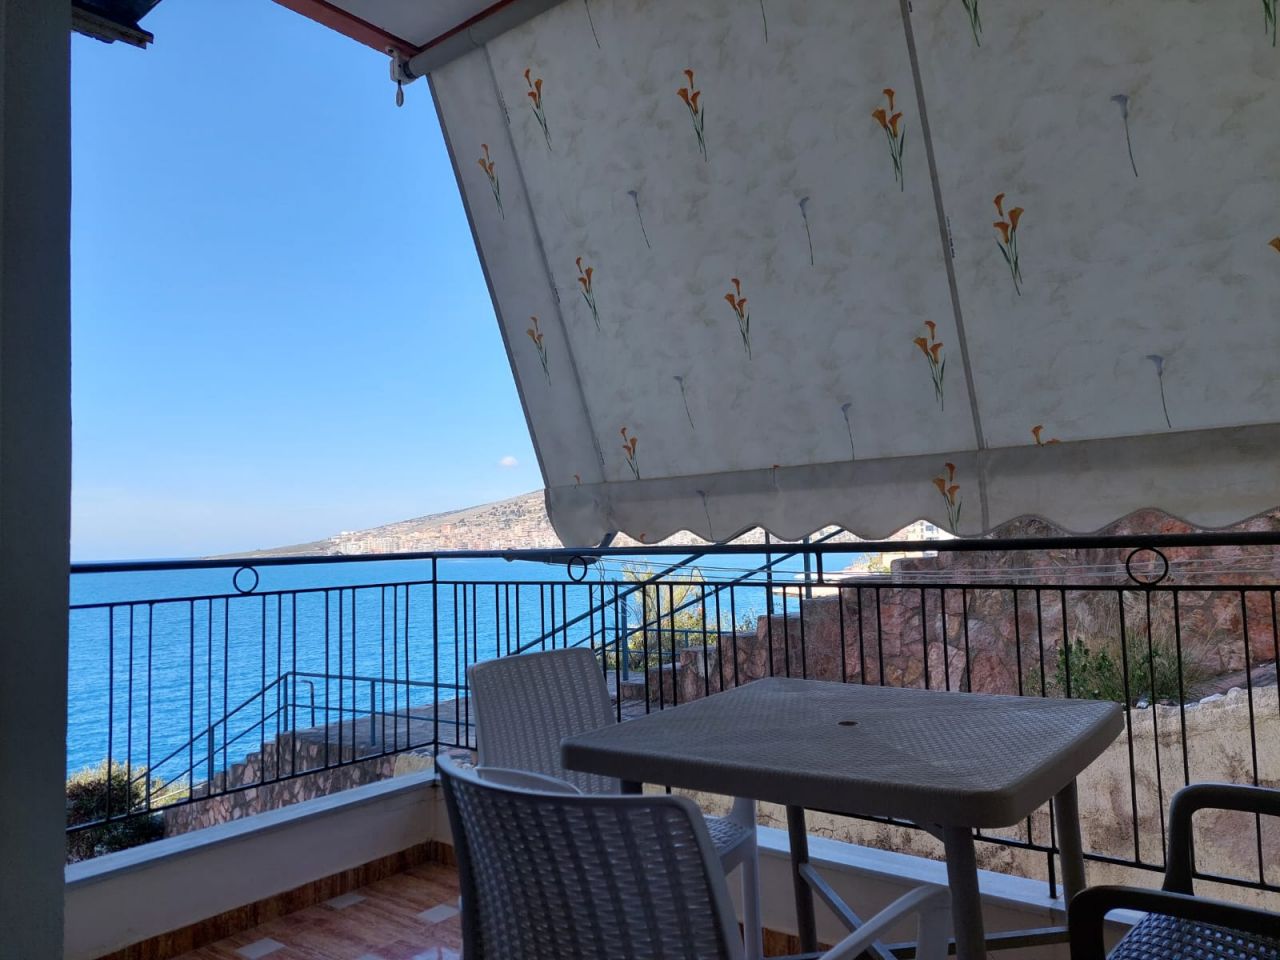 Albania Estate In Saranda For Sale Next To The Water